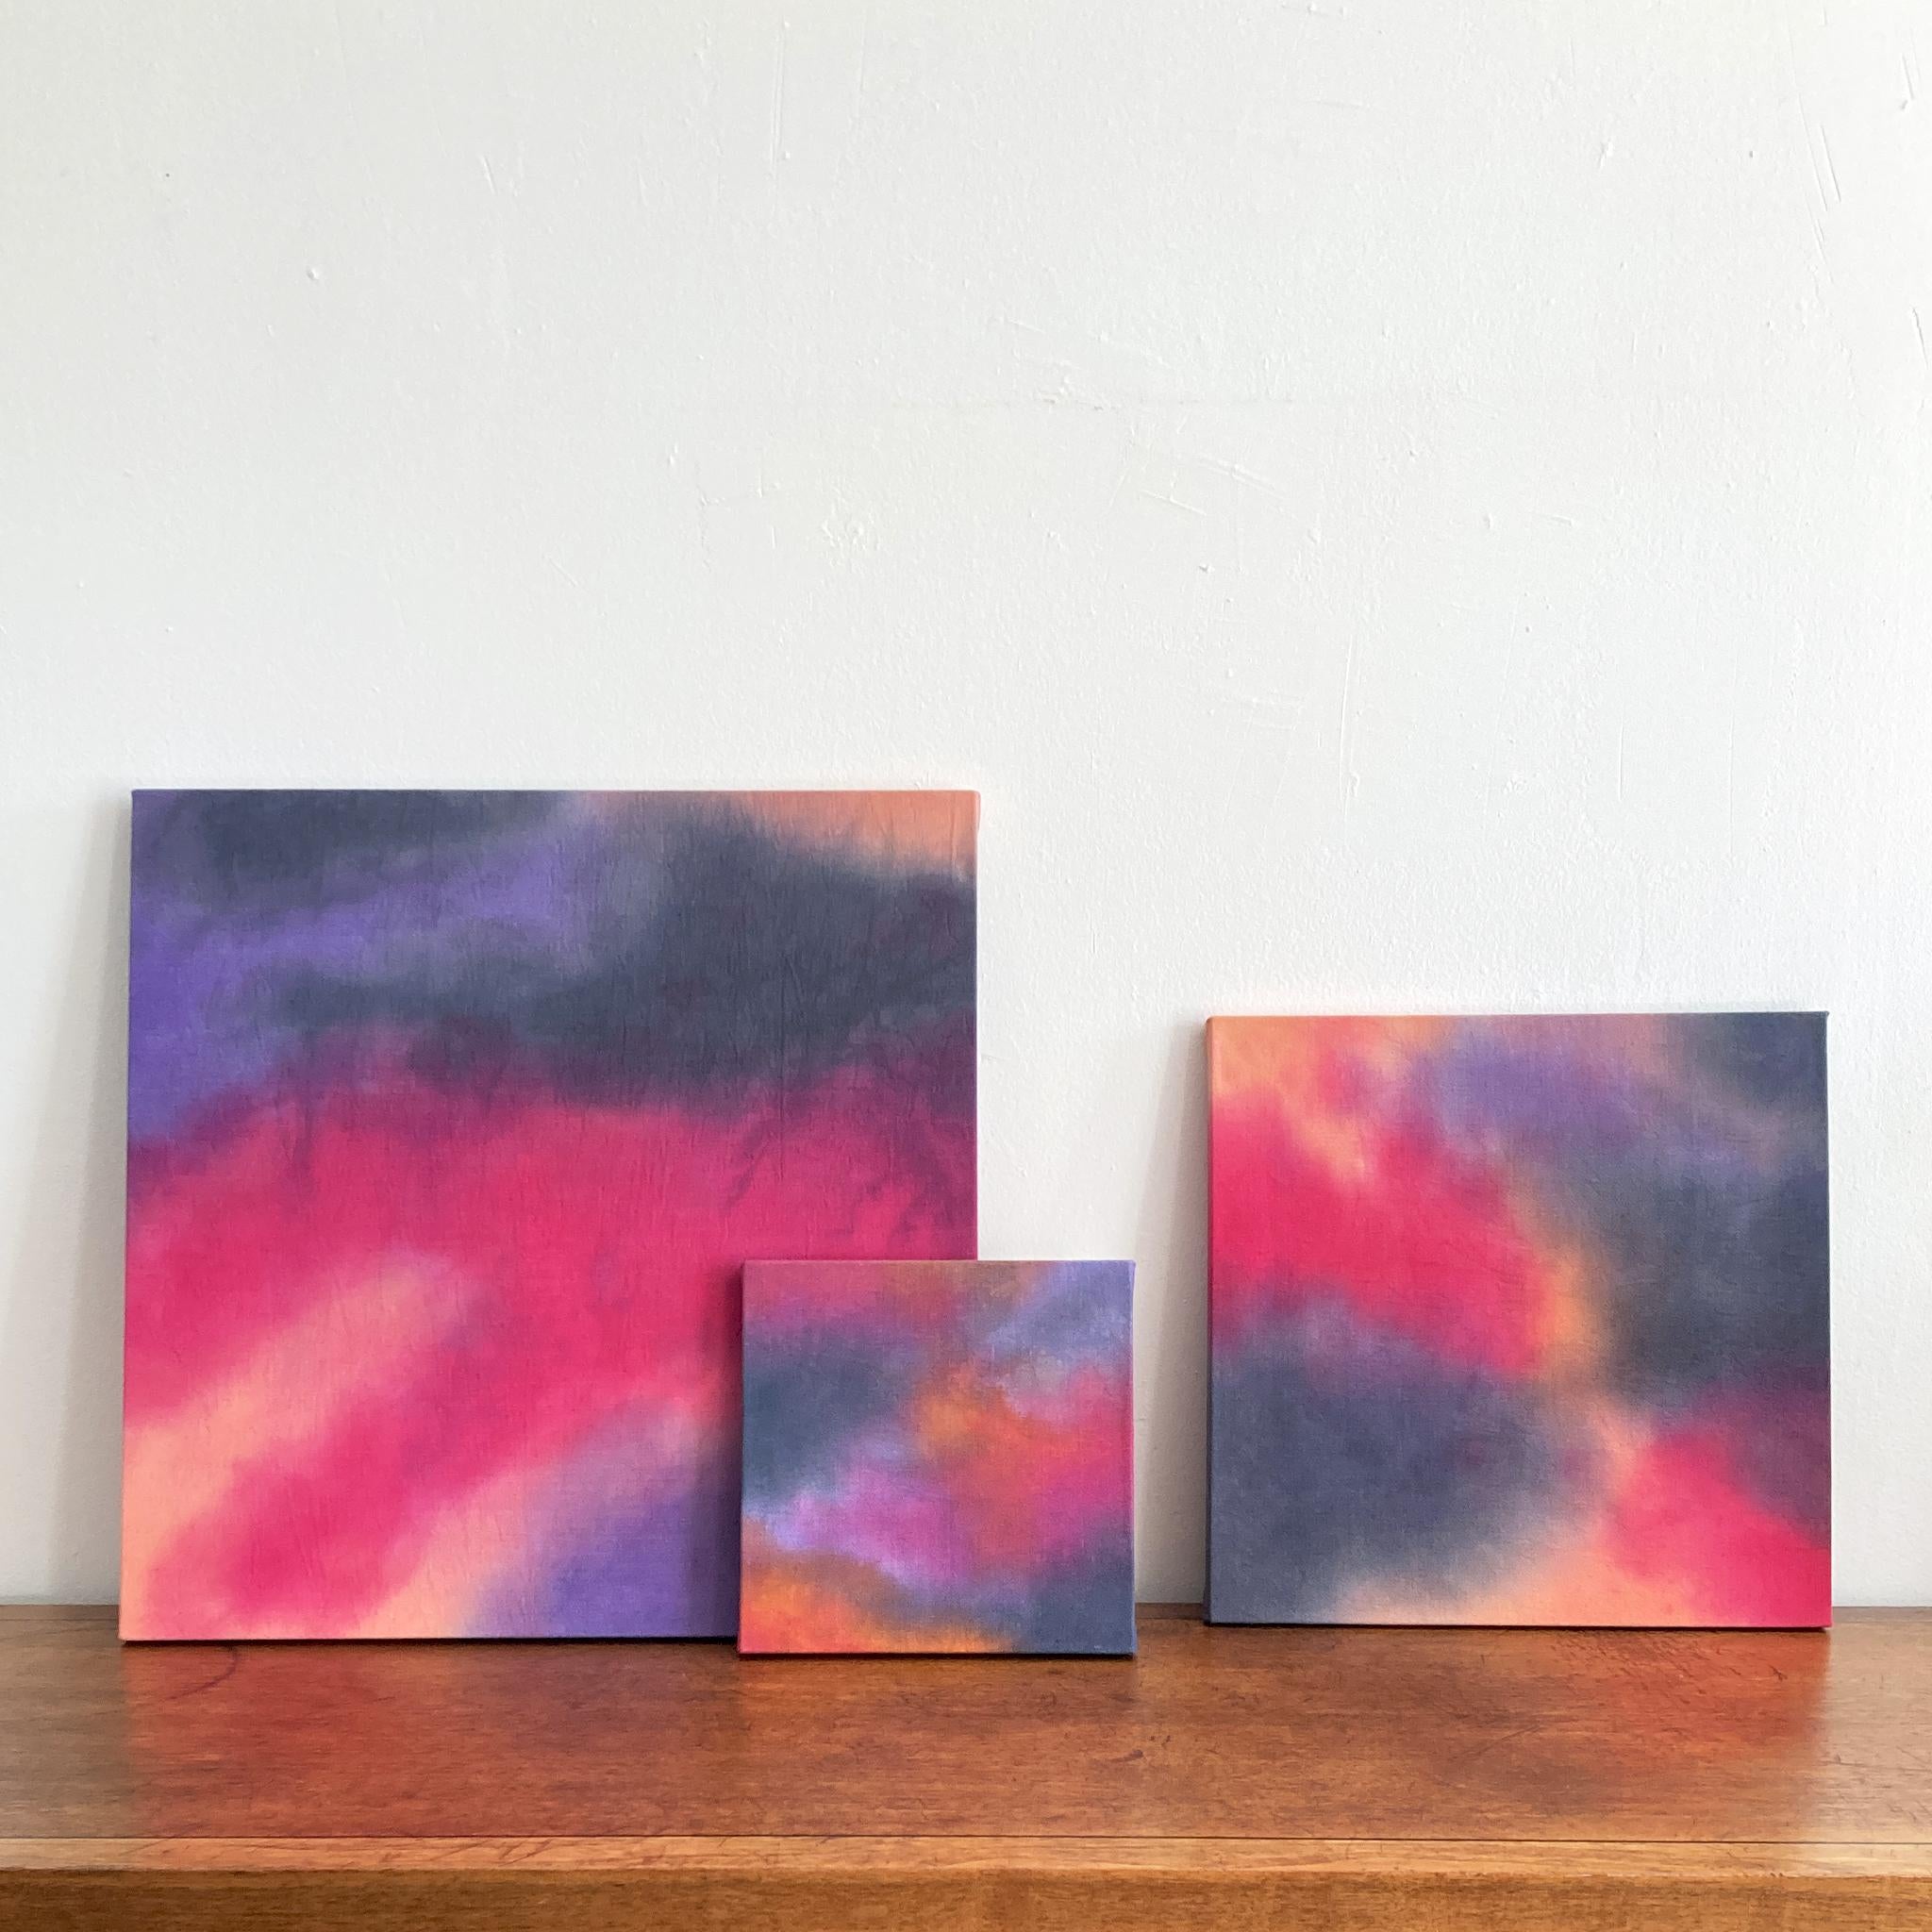 American Abstract Painting in Magenta, Gray, Peach, Lilac, 10 x 10 inches, Contemporary For Sale